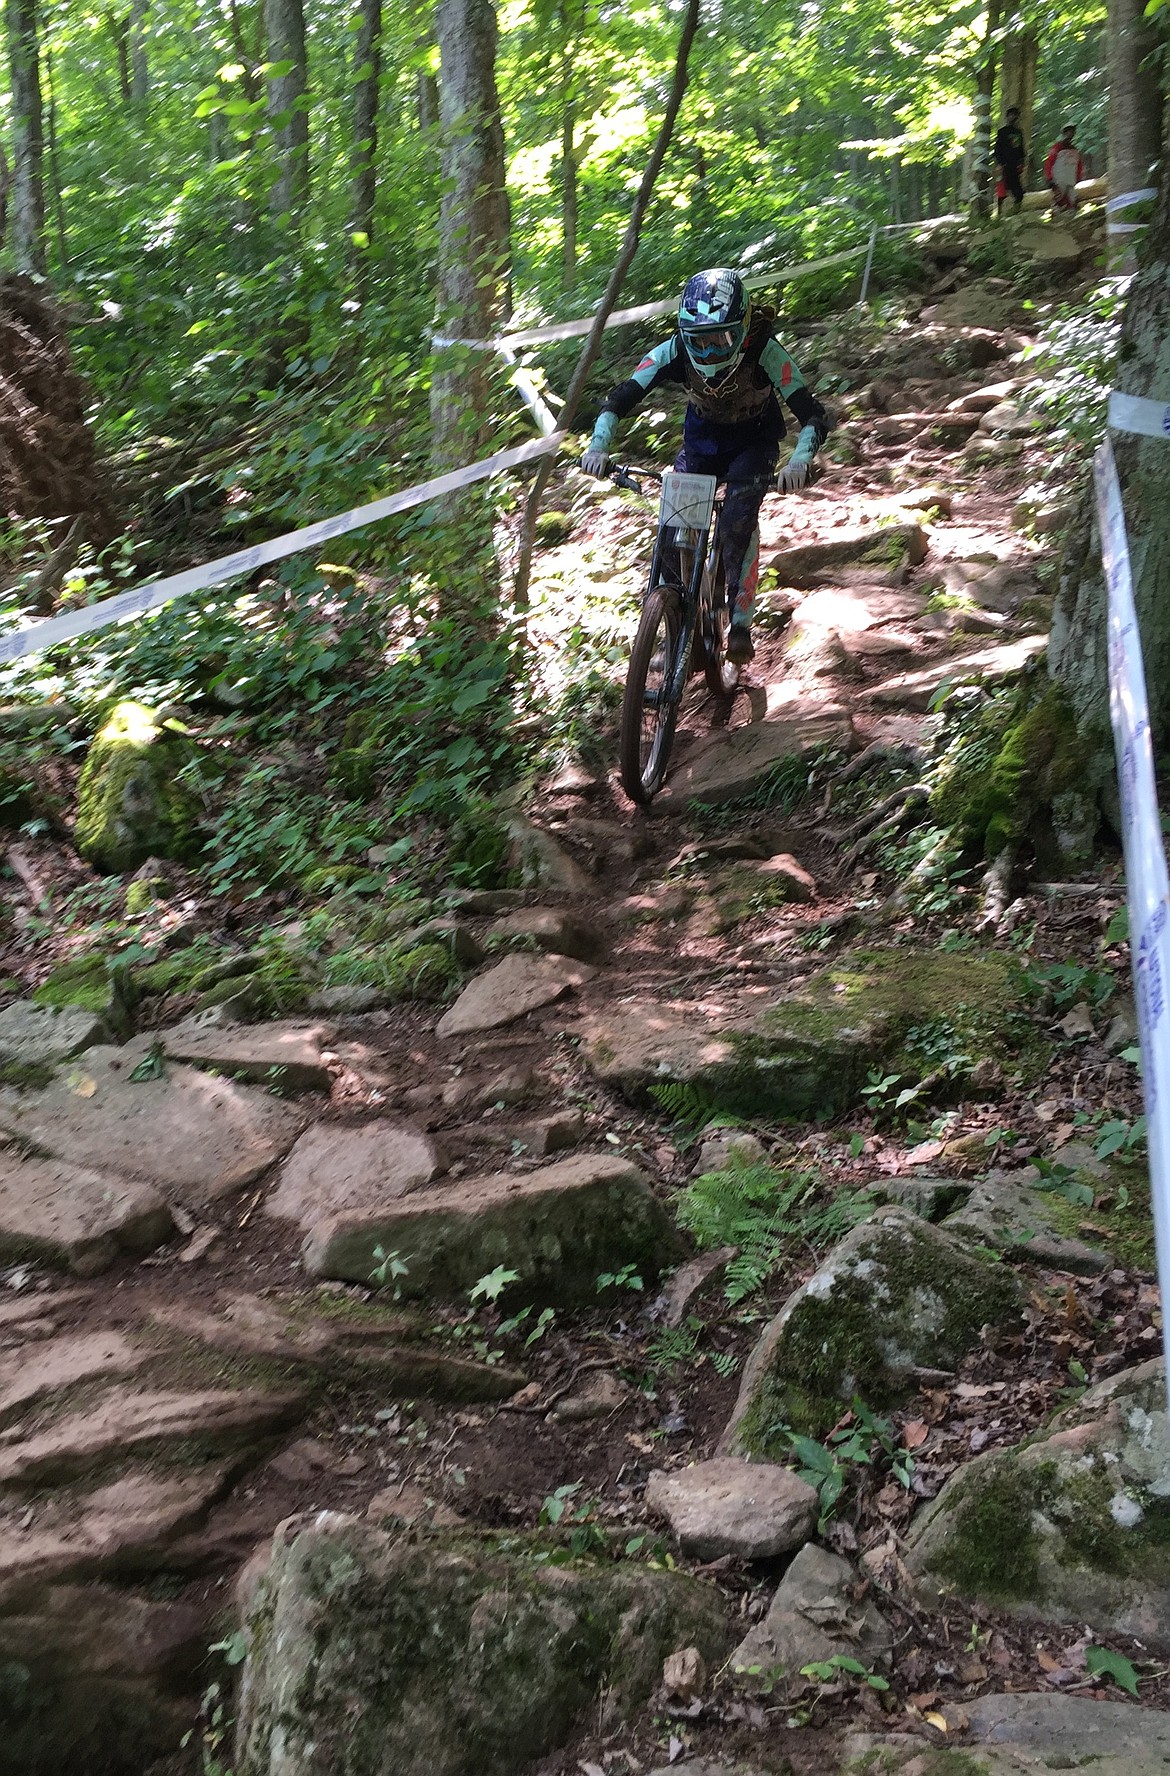 Ella Erickson, 15, of Hayden, slams down a mountain track during the 2018 USA Cycling Mountain Bike National Championships in West Virginia, which concluded Sunday. Ella won first place in her age group for downhill racing. (Courtesy photo)